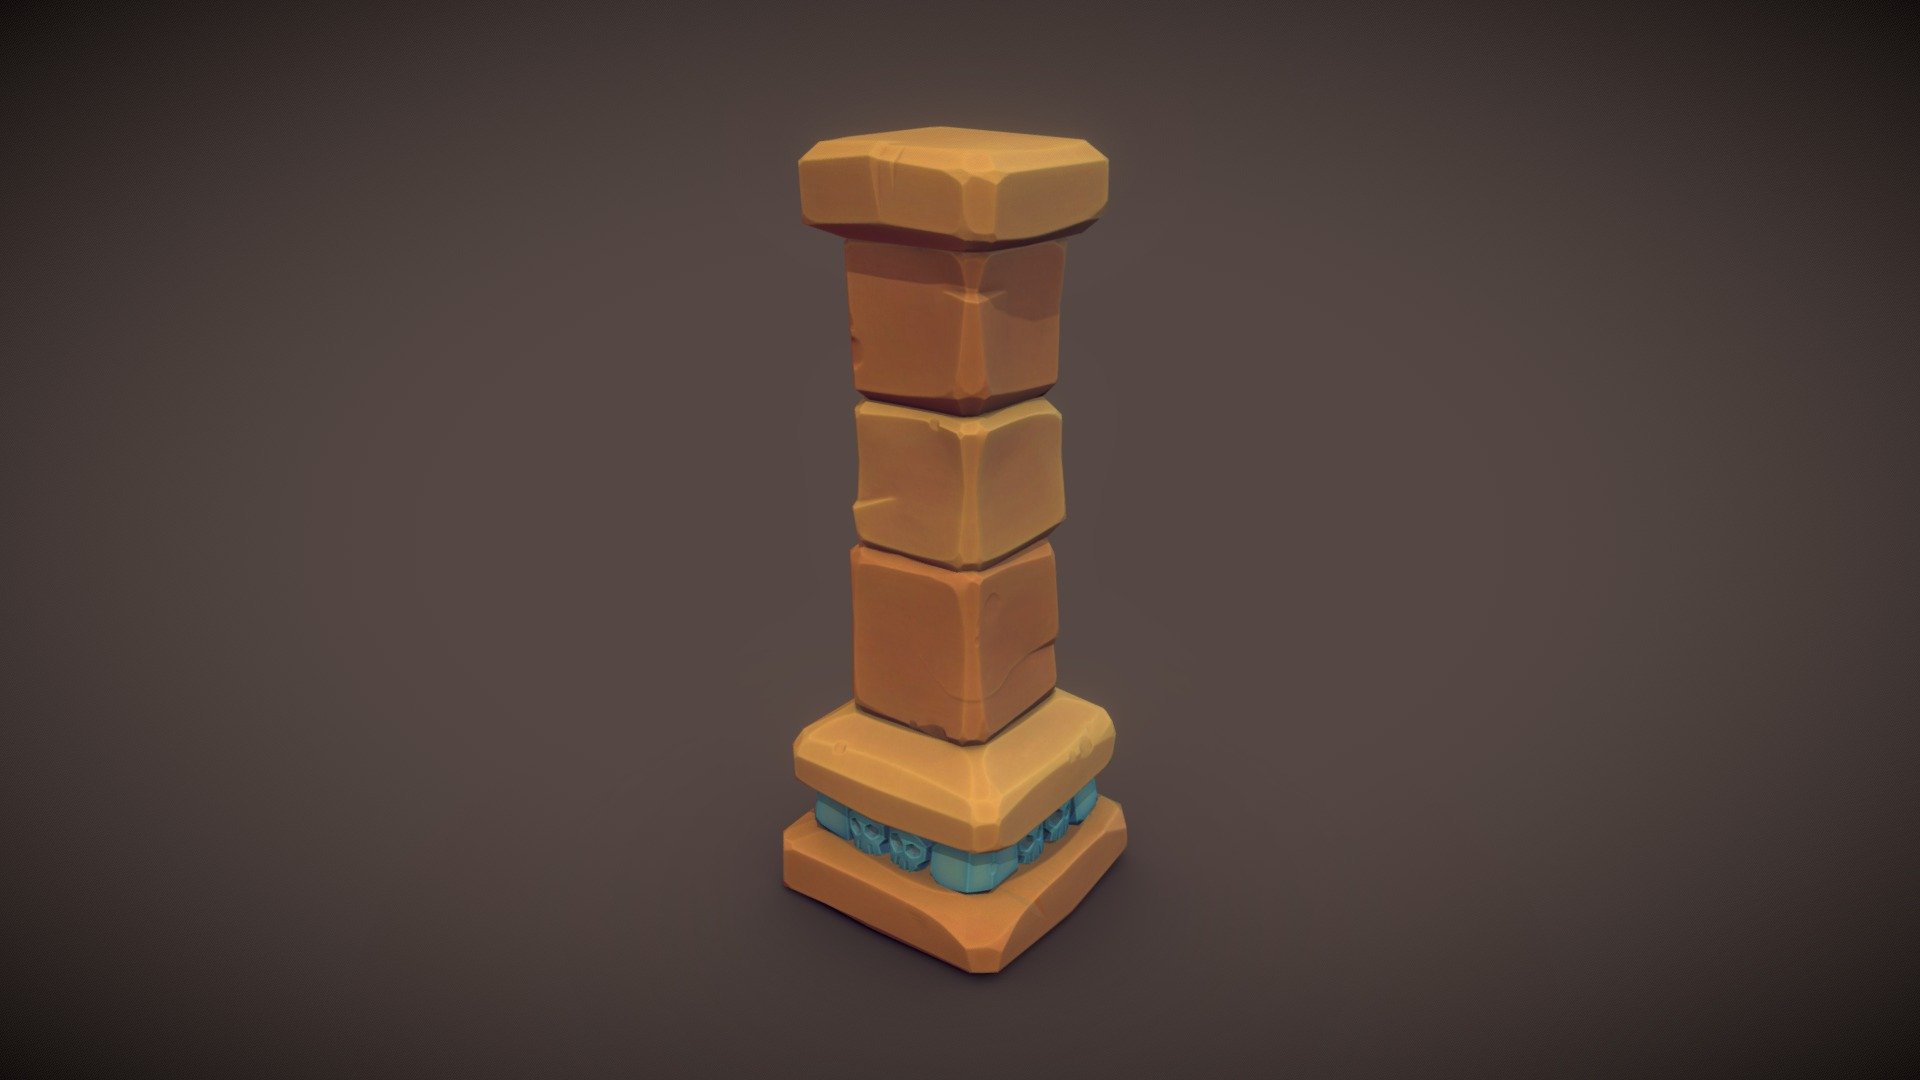 Testing a new workflow (sculpting in zbrush + substance for textures) on an old asset (dungeon starter set) 3d model